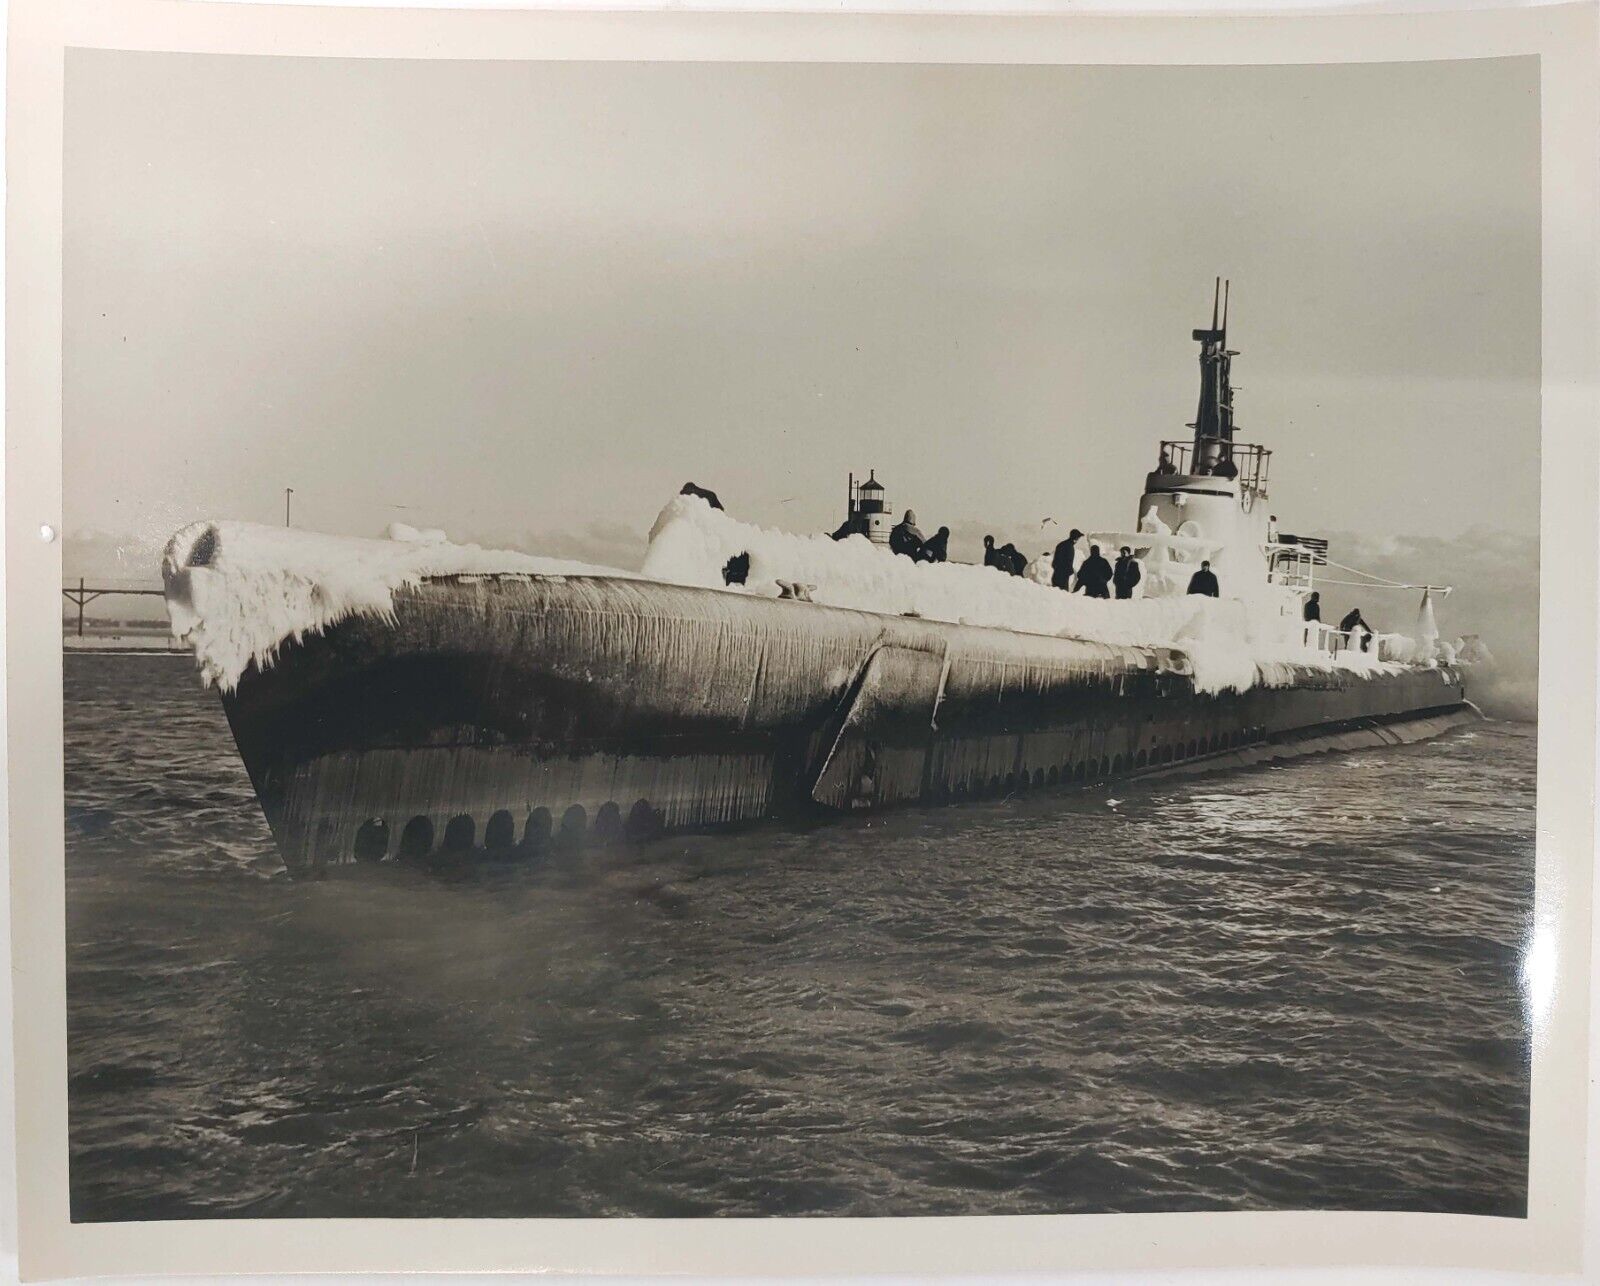 Lot of 9 Photos of WWII Gato Class Submarine at New London CT and on Patrol USN